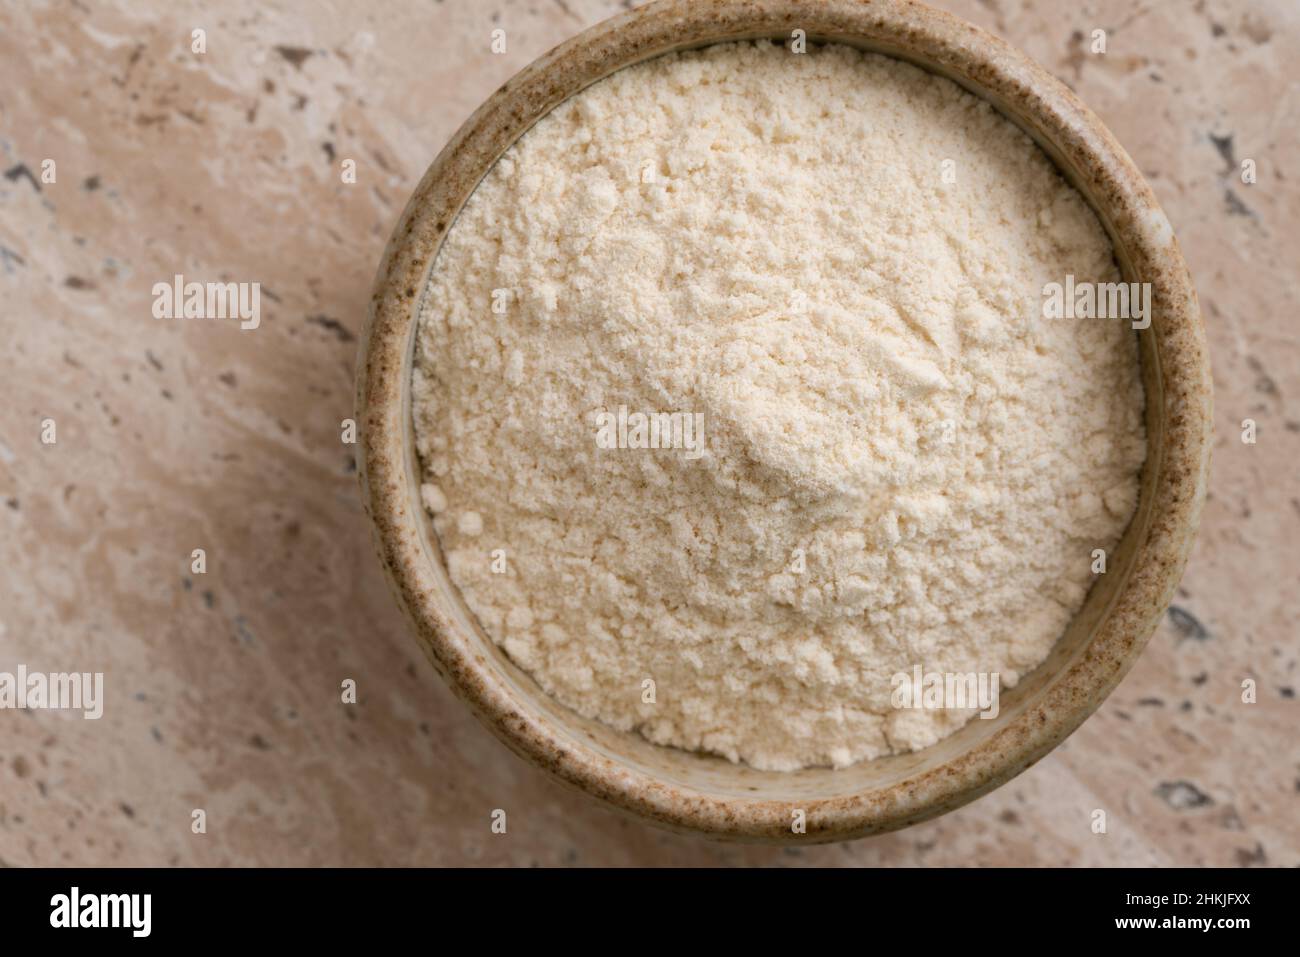 Millet Flour in a Bowl Stock Photo